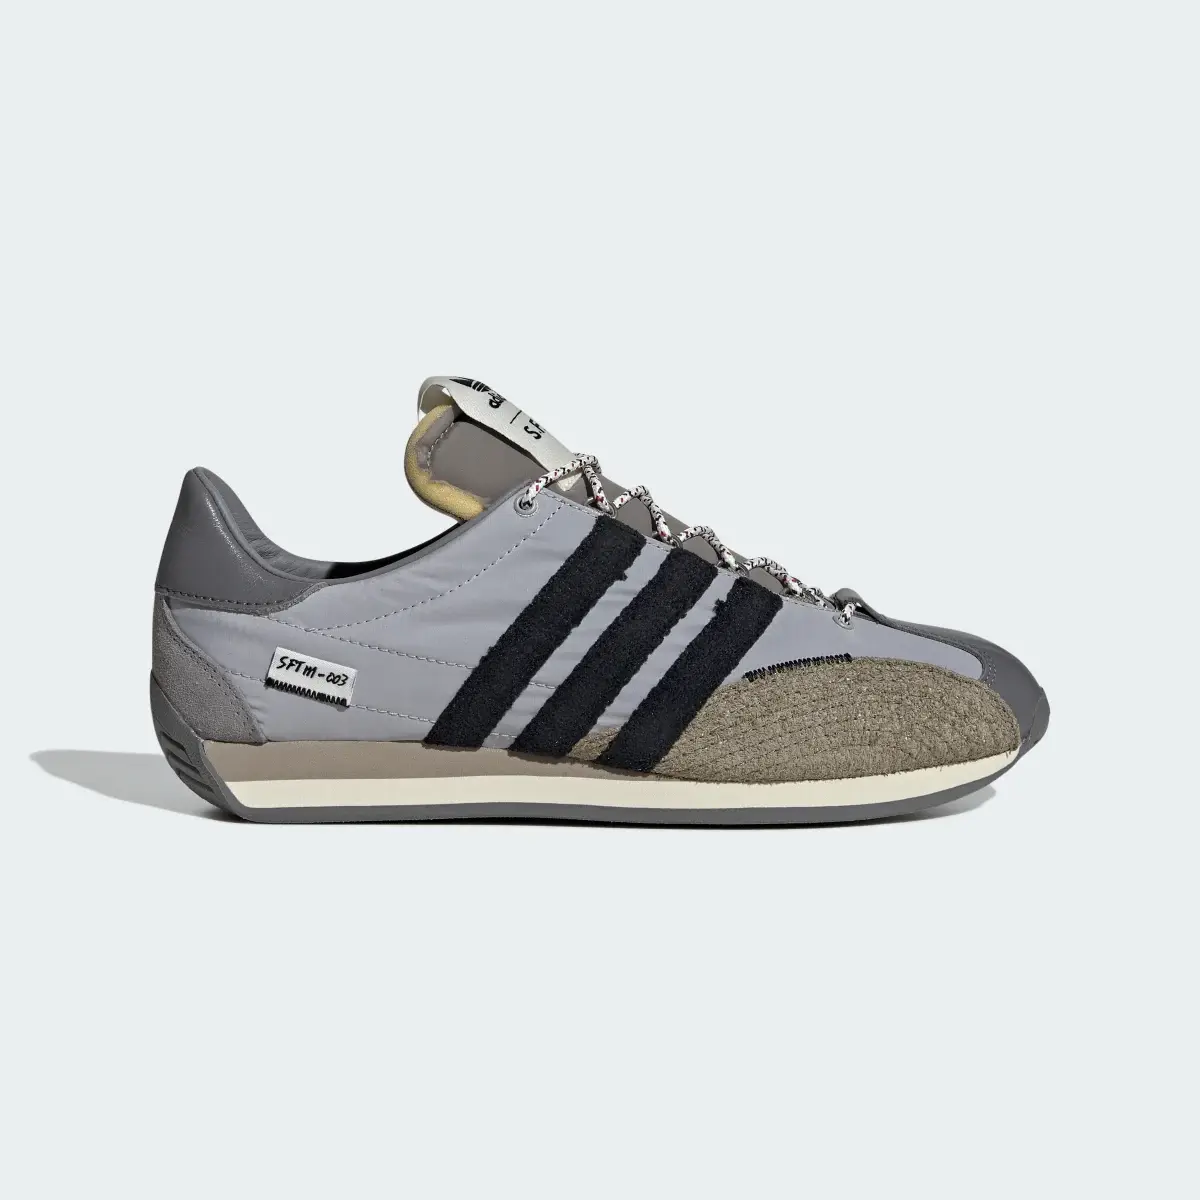 Adidas SFTM Country OG Low Trainers. 2